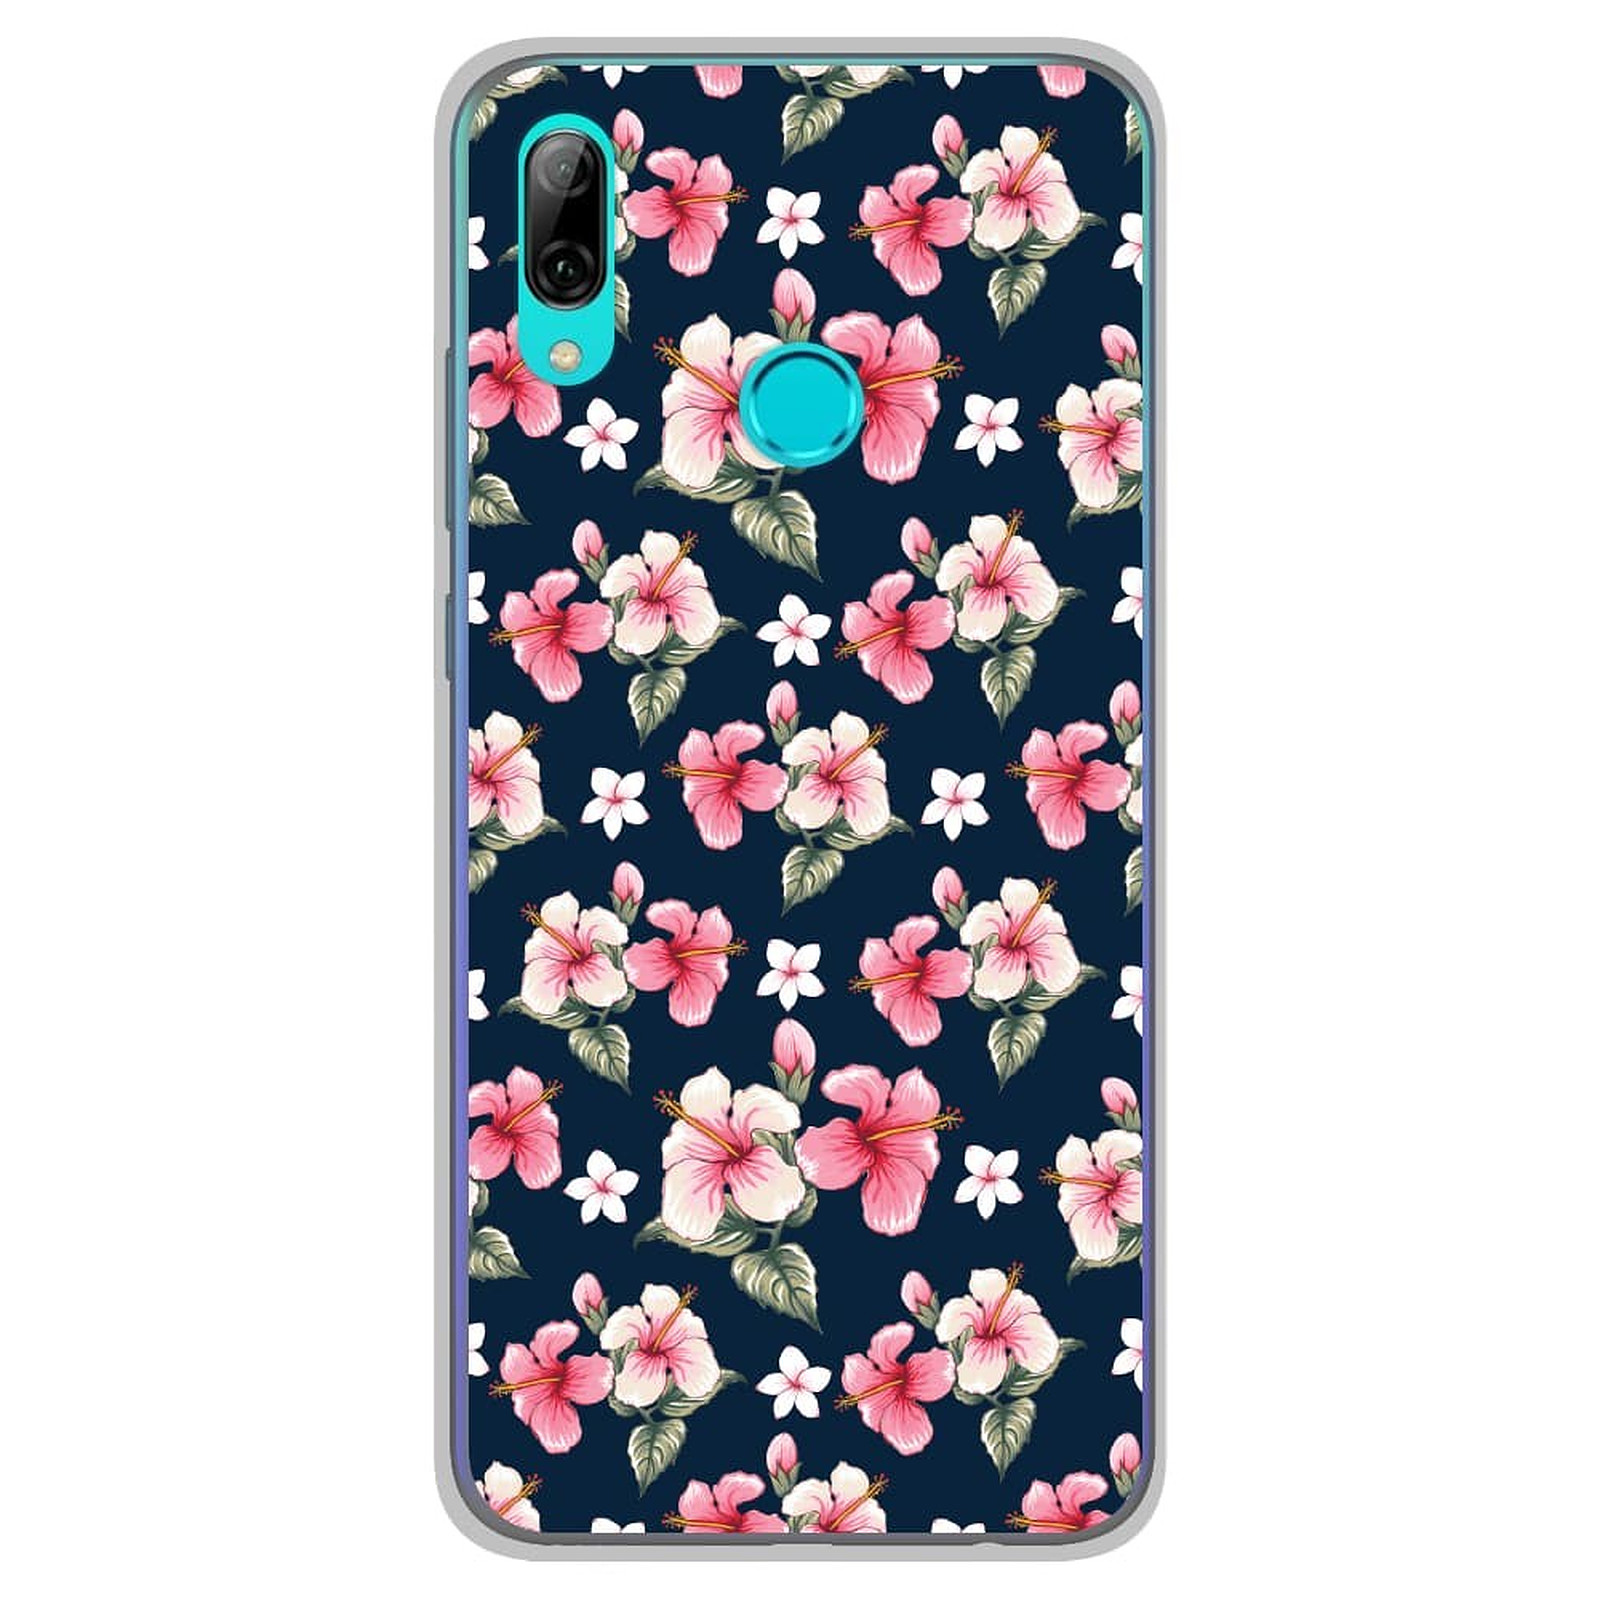 1001 Coques Coque silicone gel Huawei P Smart 2019 motif Hibiscus Vintage - Coque telephone 1001Coques